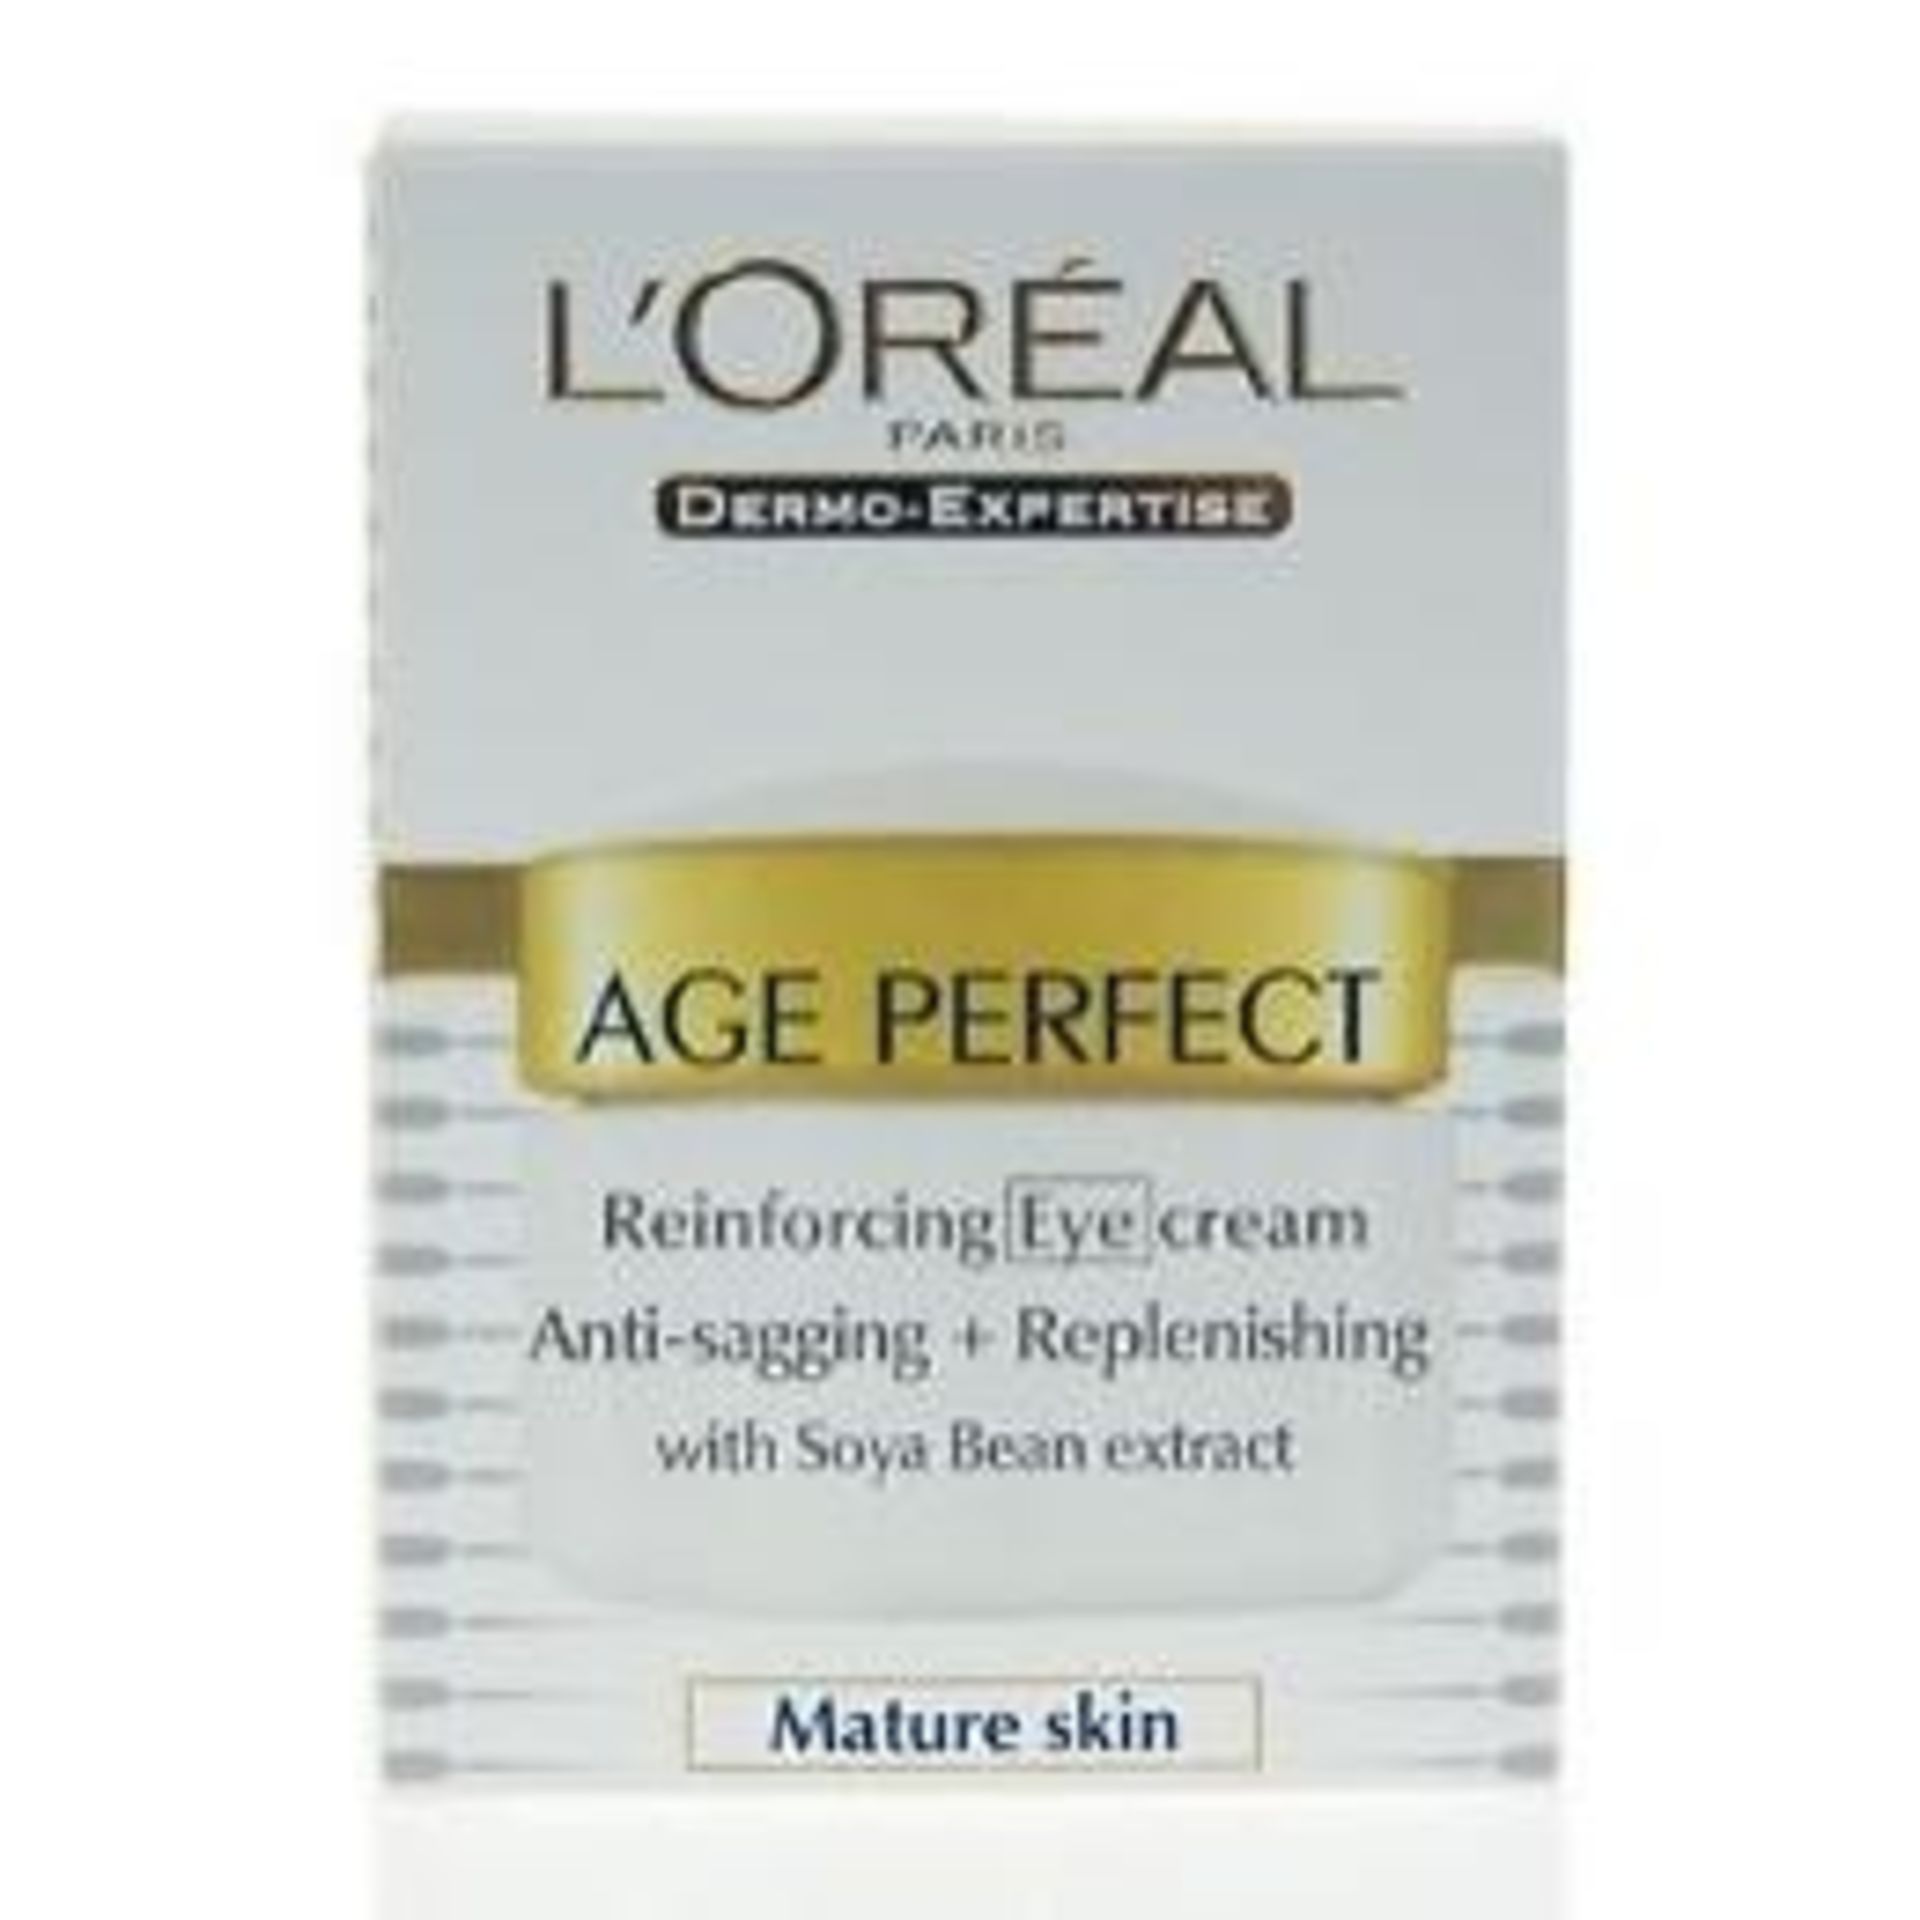 V L'Oreal Dermo-Expertise Age Perfect Eye cream mature skin - Image 2 of 4